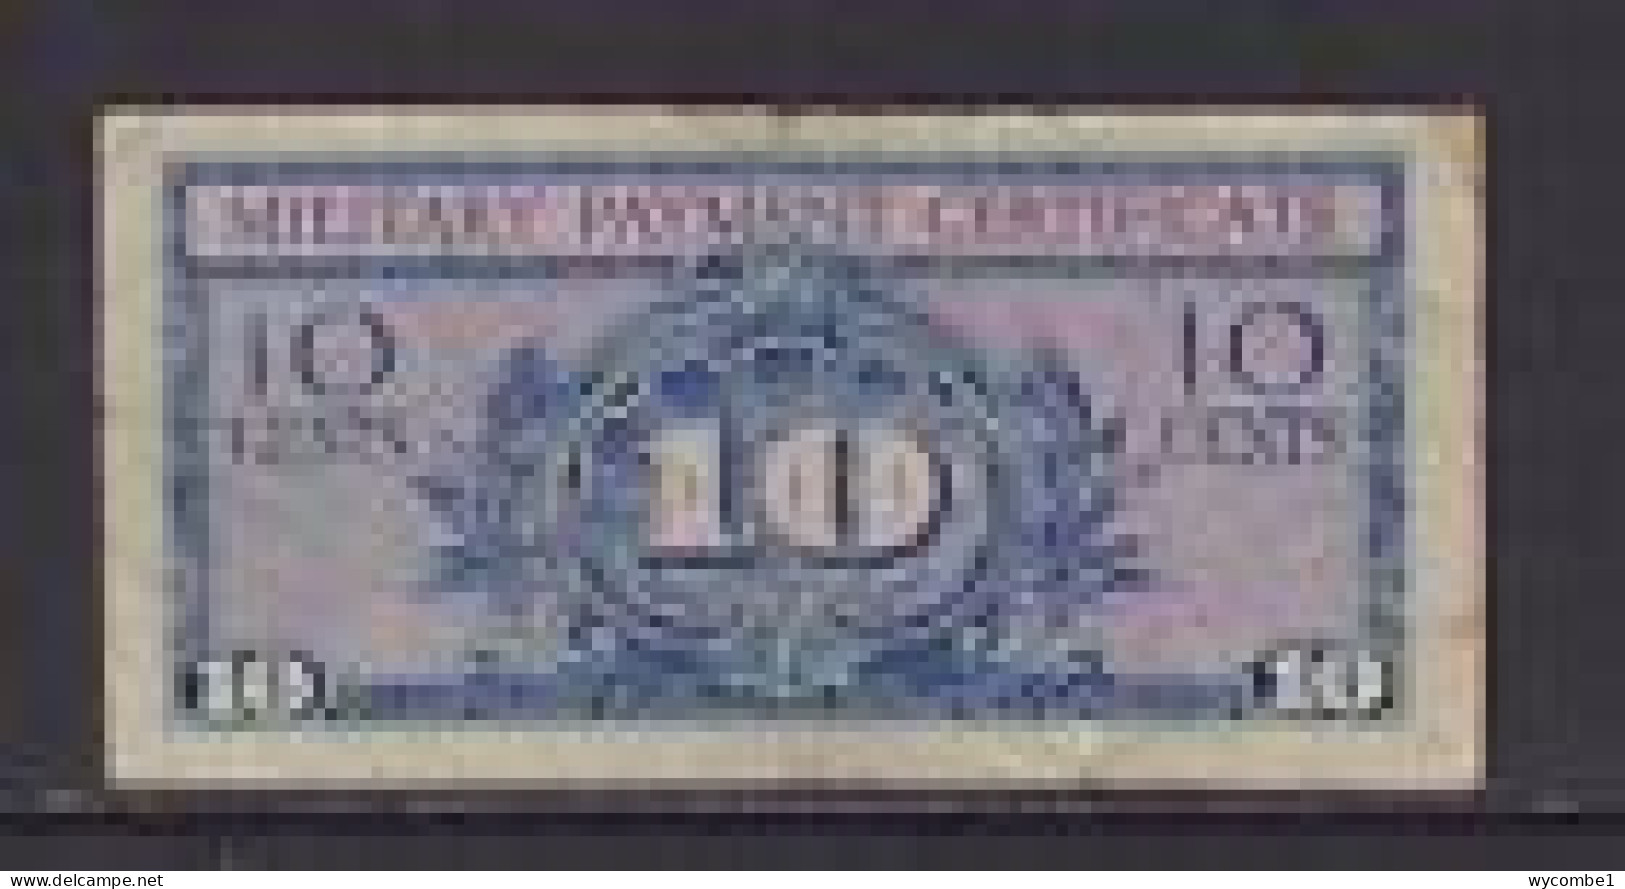 UNITED STATES - 1961-64 Military Payment Certificate 10 Cent Circulated Banknote - 1961-1964 - Series 591